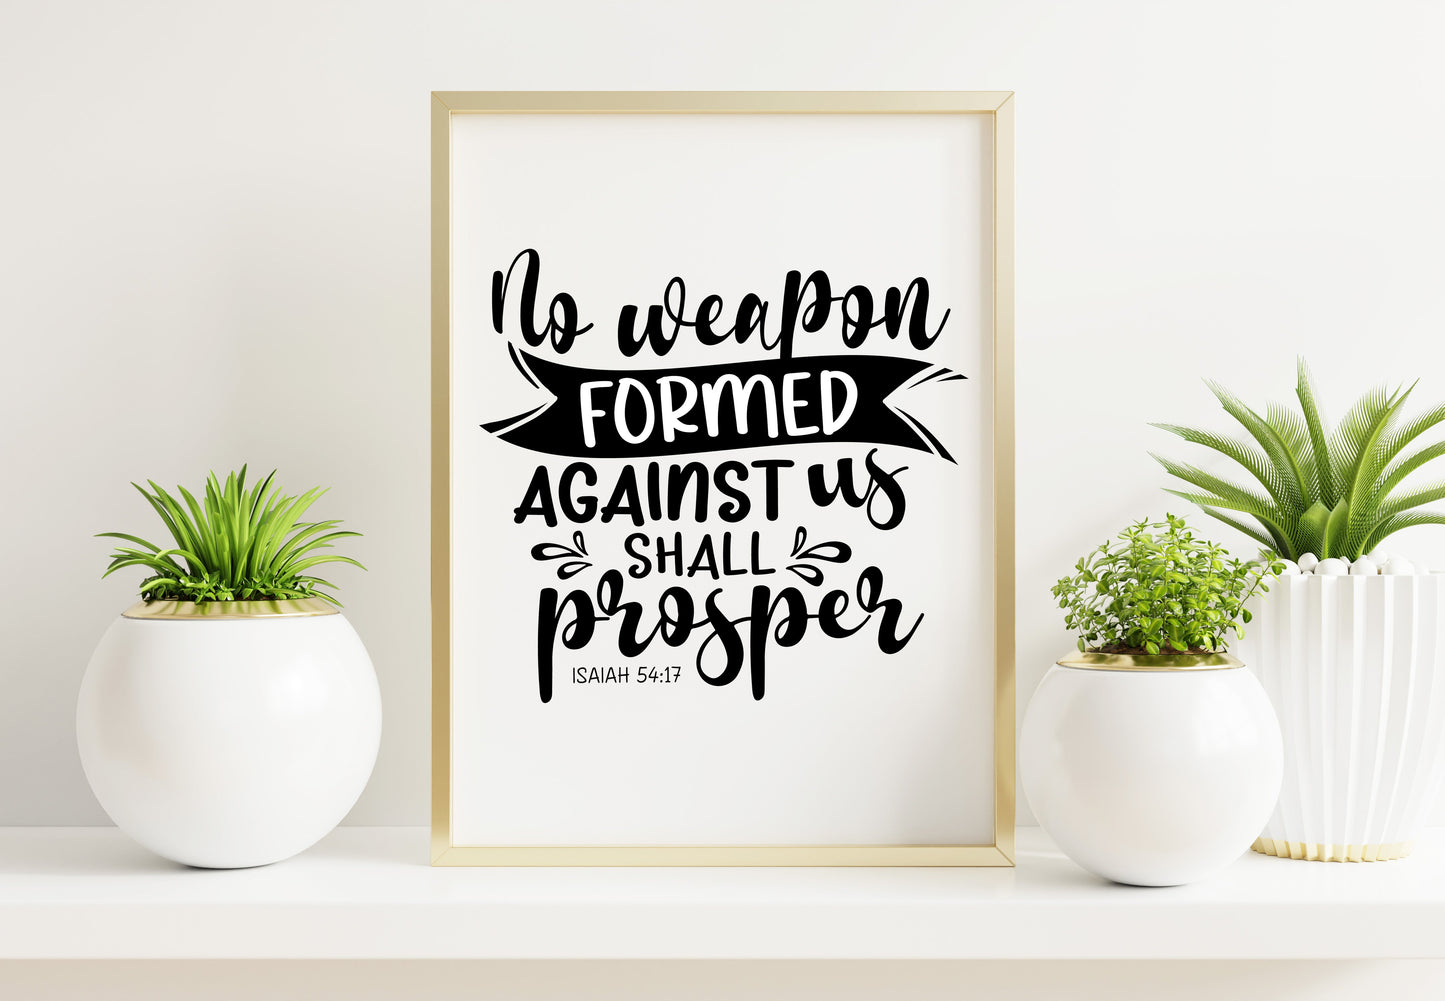 No Weapon Formed Bible Verse Word Art.